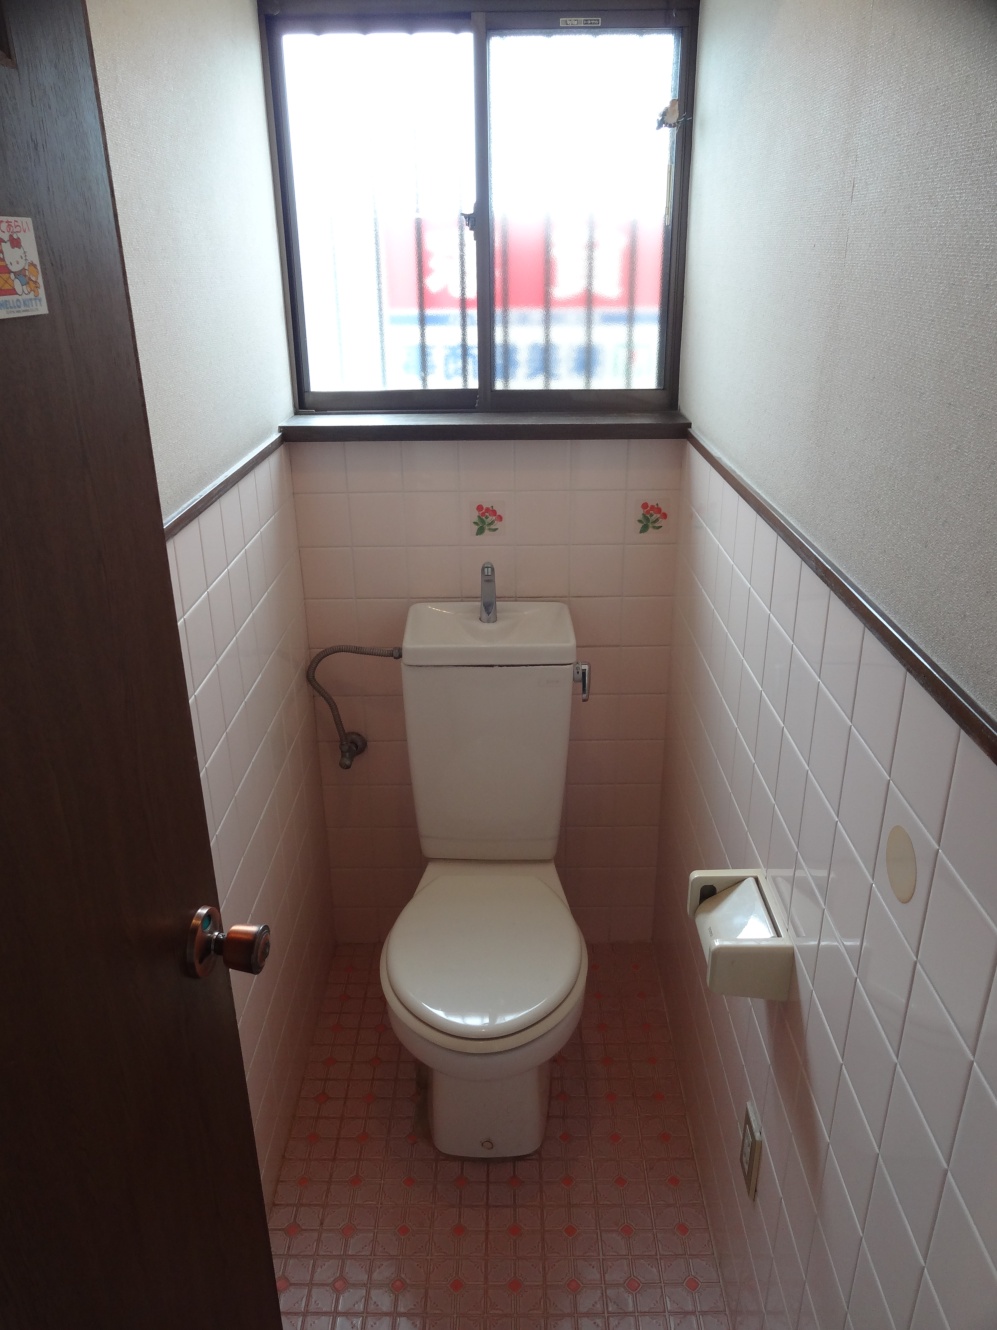 Toilet. It comes with a window in the toilet